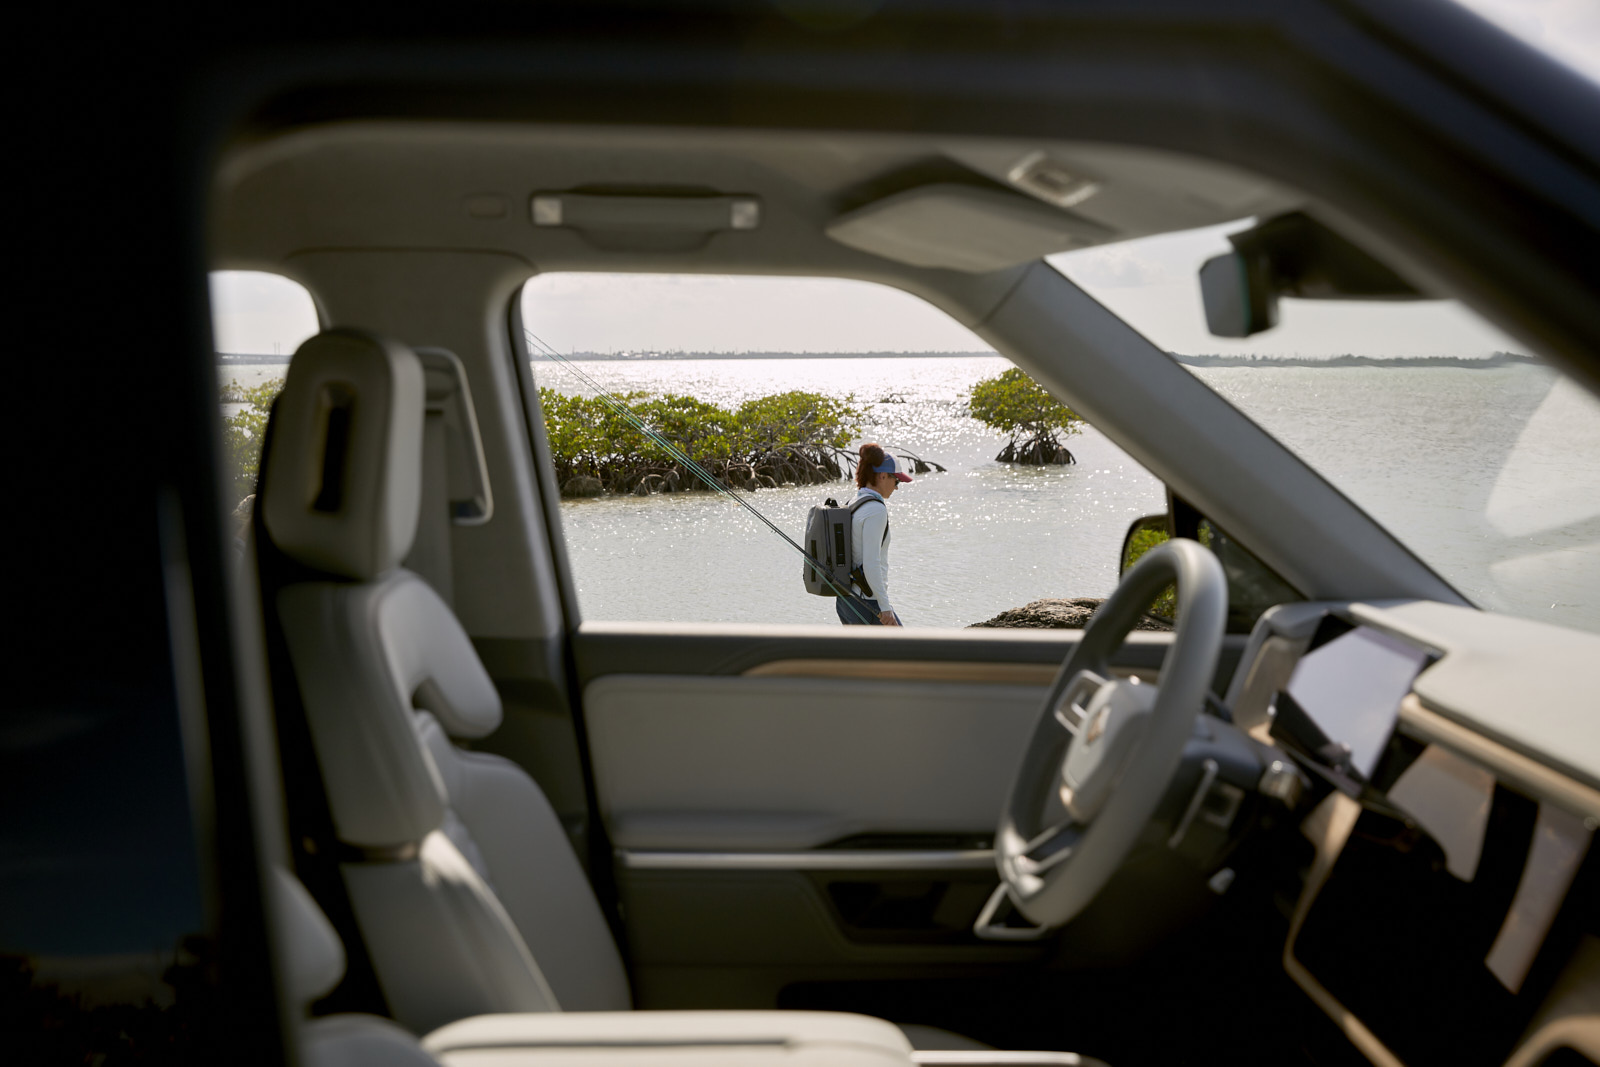 Automotive advertising directed and photographed by Dylan Johnston for electric vehicle Rivian. Shot on location in the Florida Keys throughout a weekend adventure fly fishing and camping in Arizona.